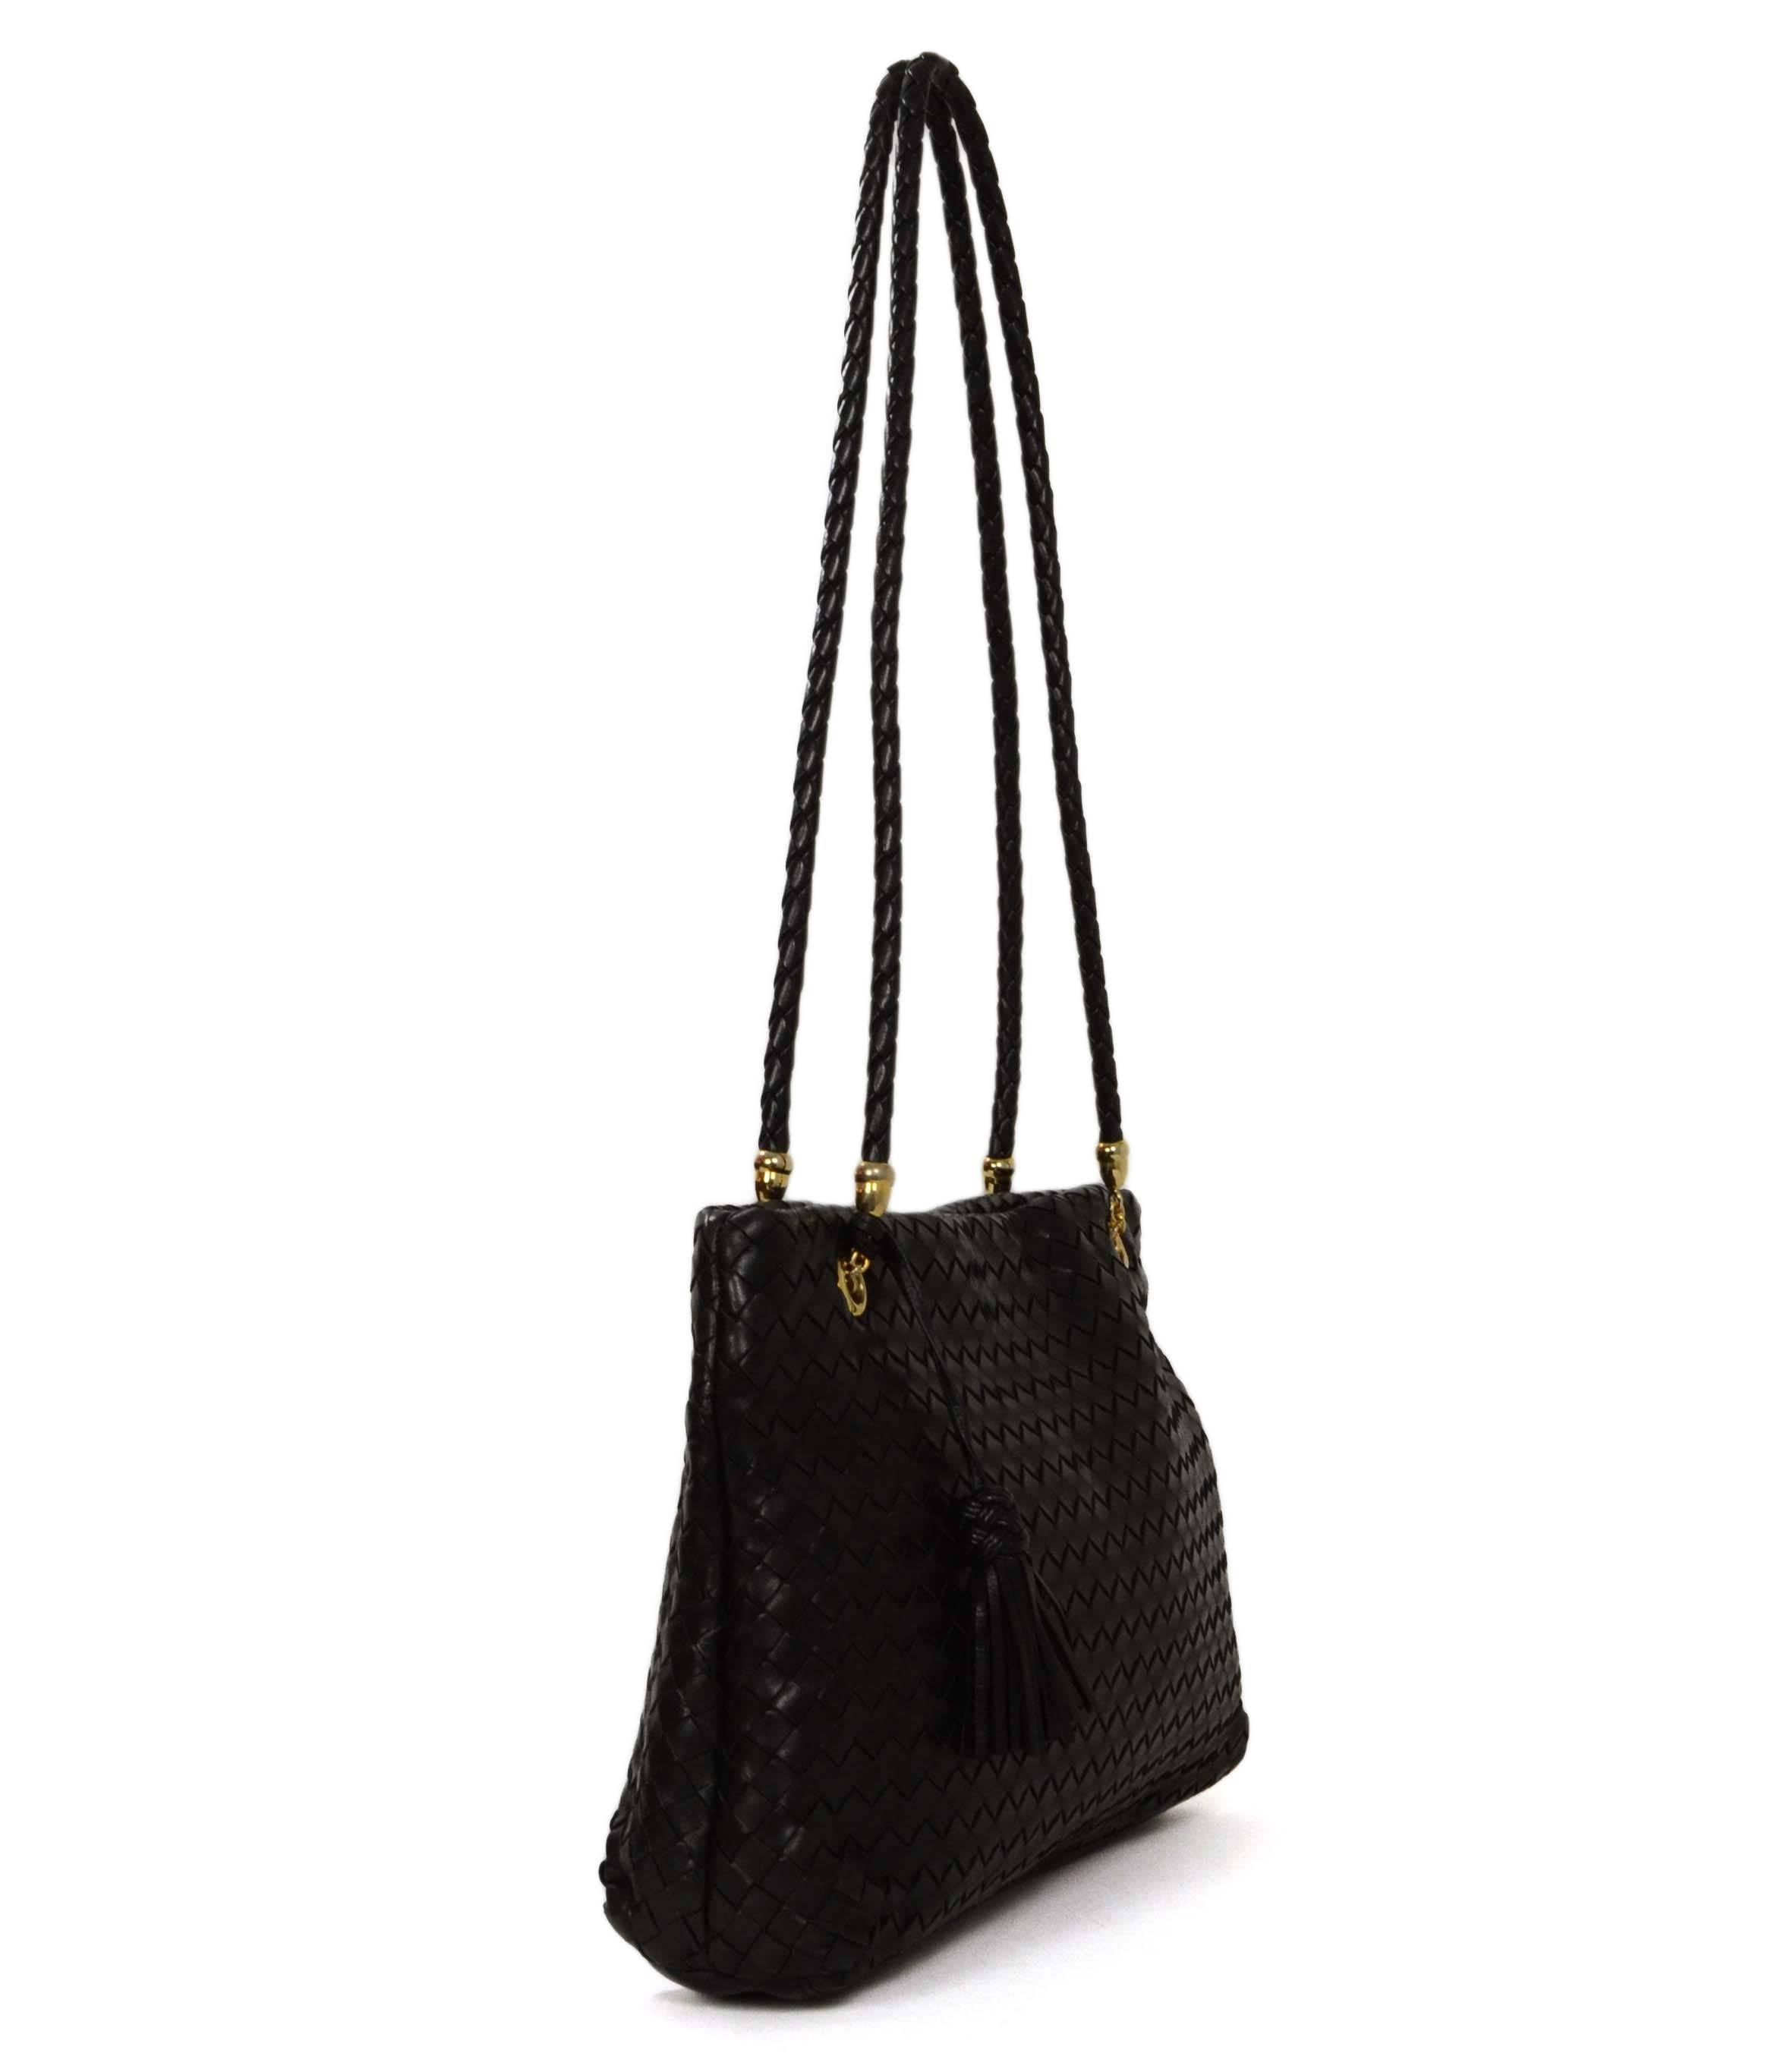 Bottega Veneta Black Woven Leather Bag 
Features large black tassel on shoulder strap
Made In: Italy
Color: Black
Hardware: Goldtone
Materials: Leather 
Lining: Beige leather
Closure/Opening: Open top with magnetic snap closure
Exterior